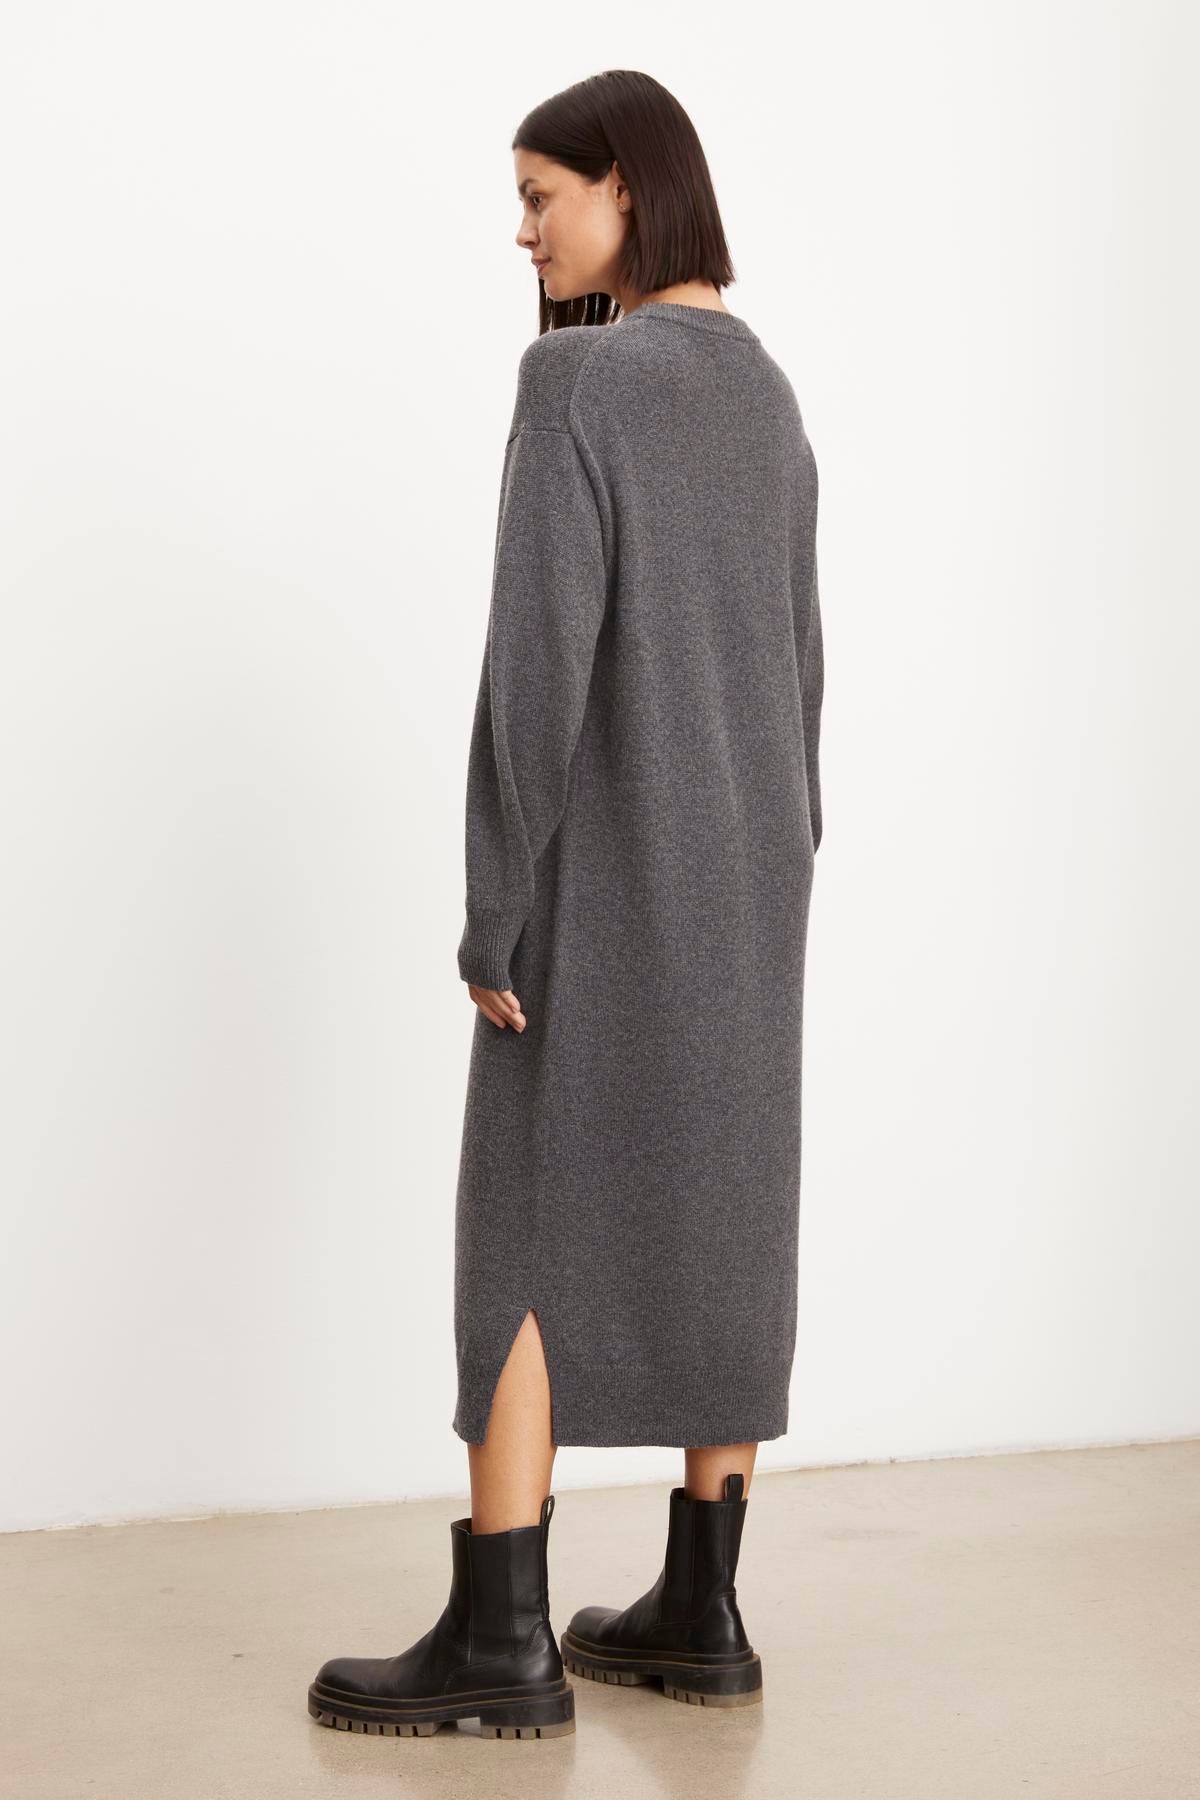   Woman in a long grey cardigan and black boots, standing sideways against a white background, wearing Velvet by Graham & Spencer's KADEN SWEATER DRESS with a side split hem. 